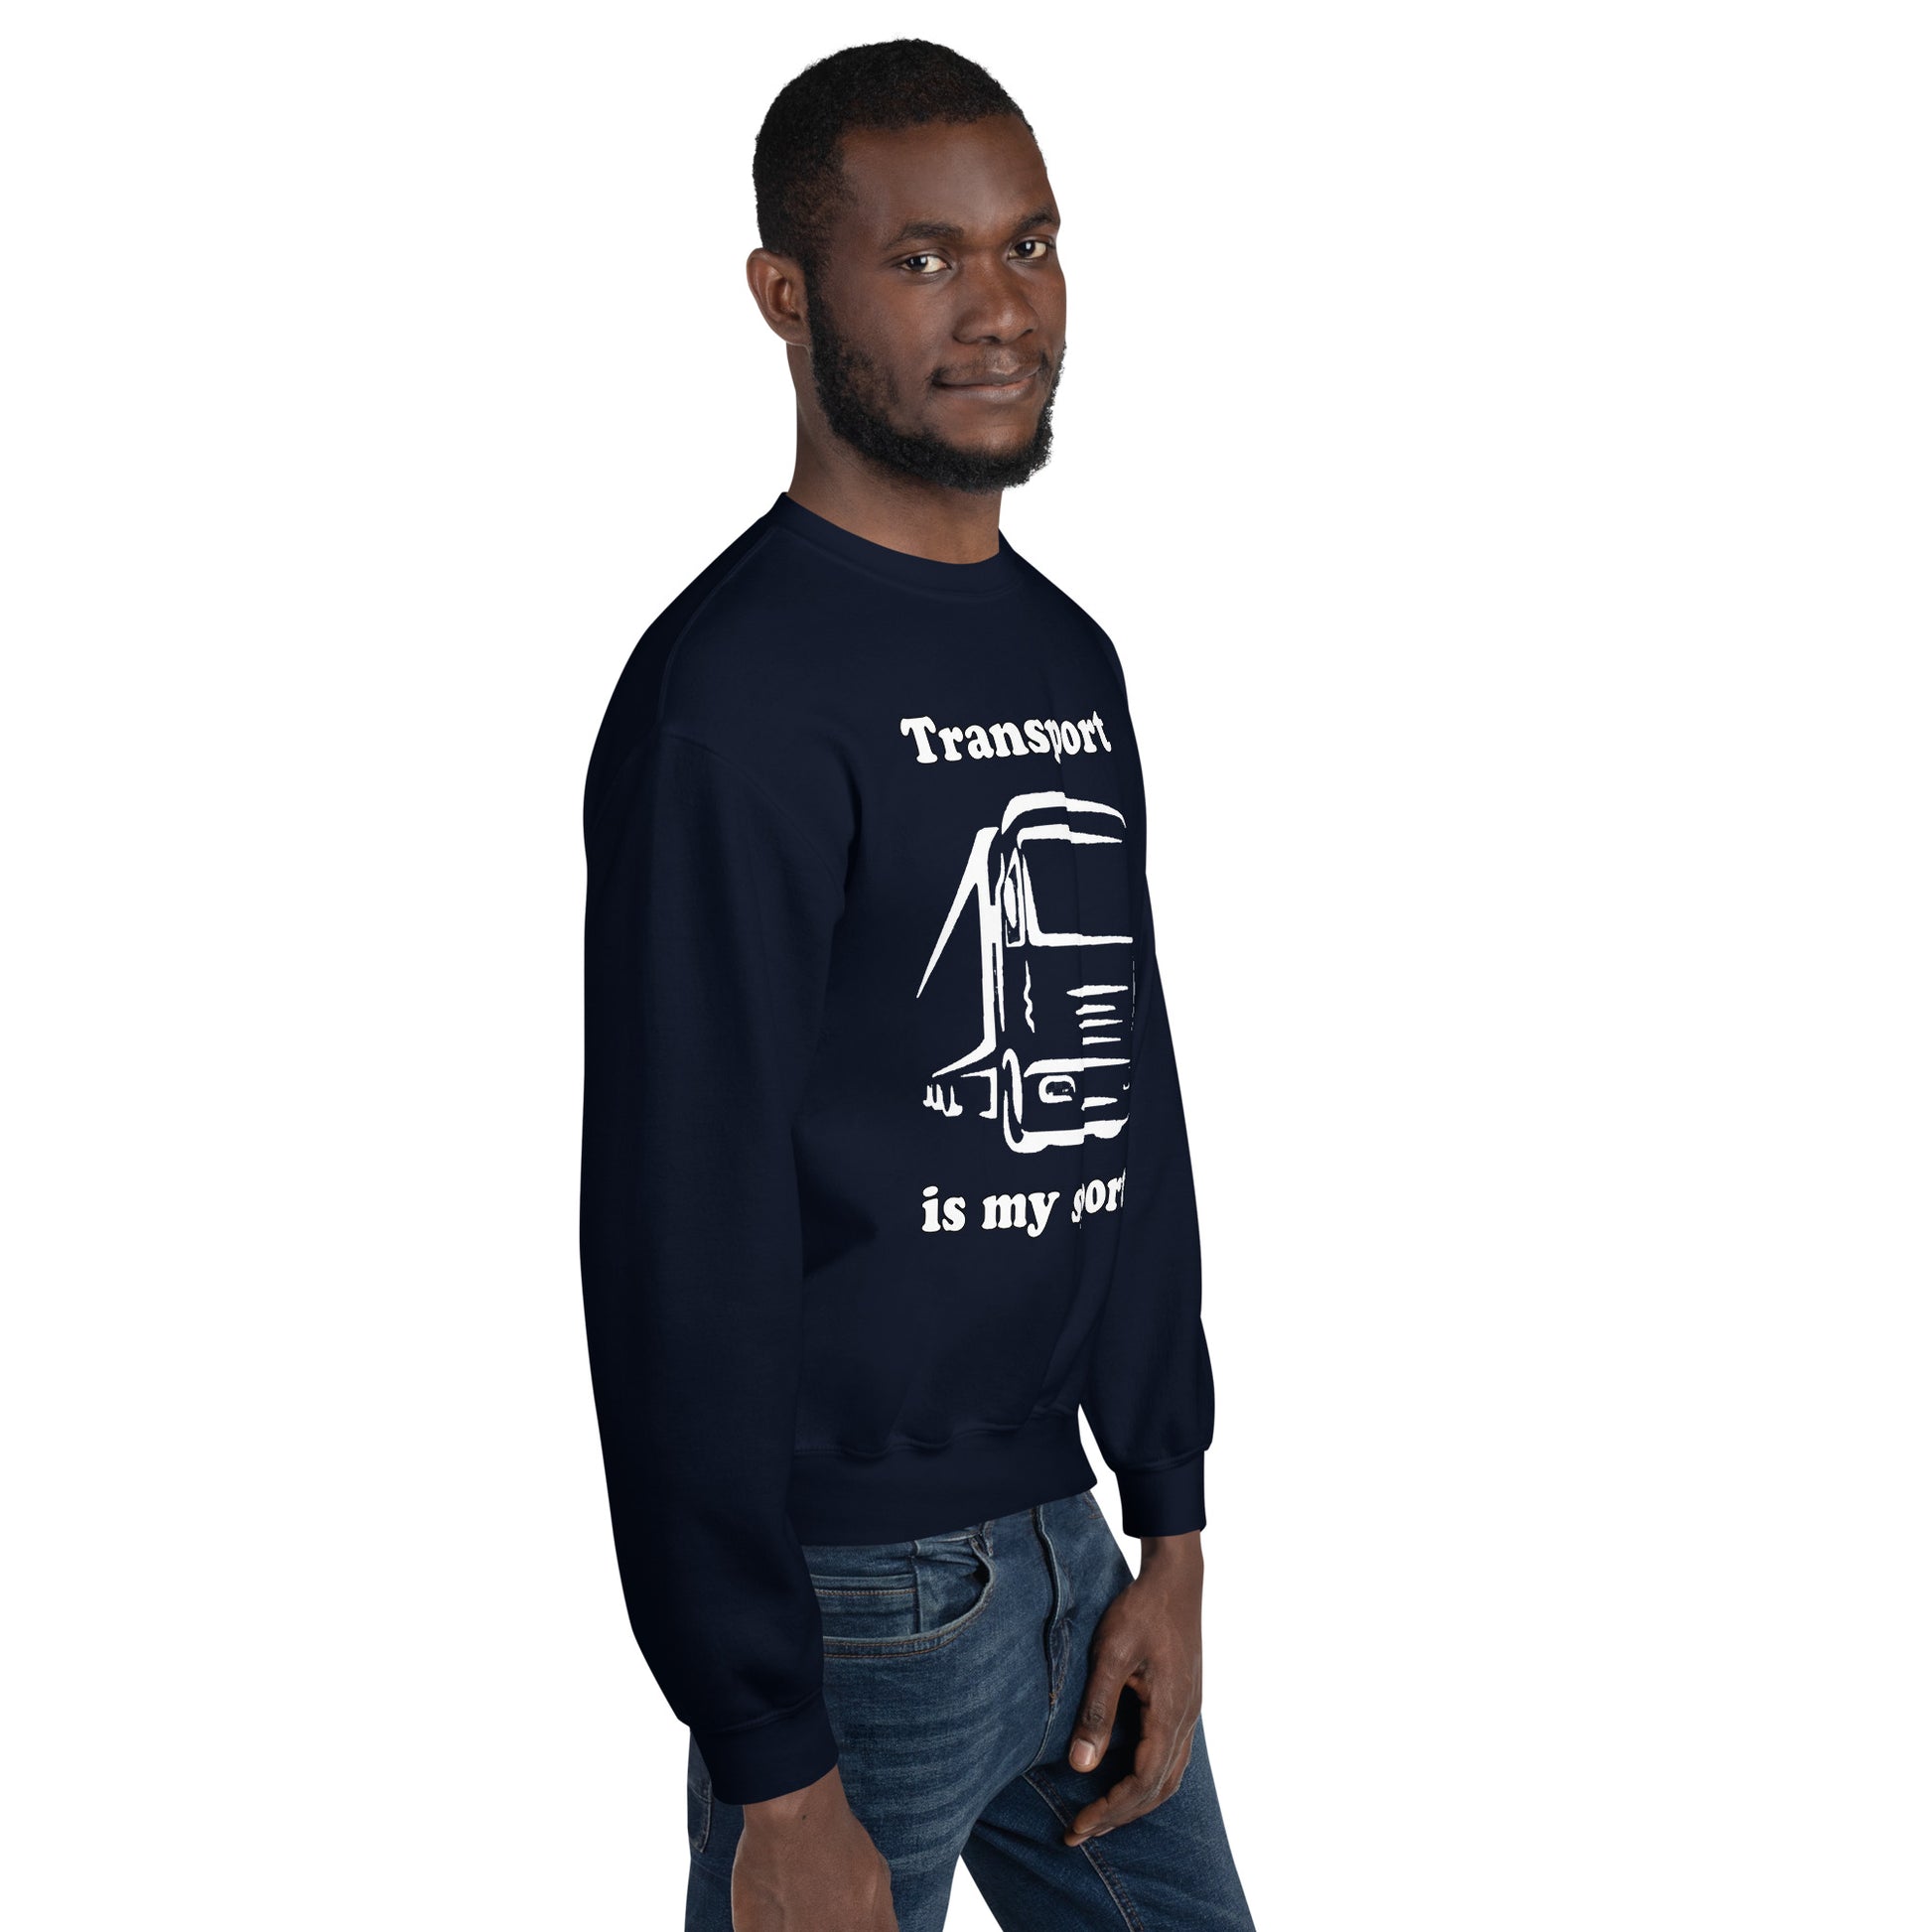 Man with navy blue sweatshirt with picture of truck and text "Transport is my sport"